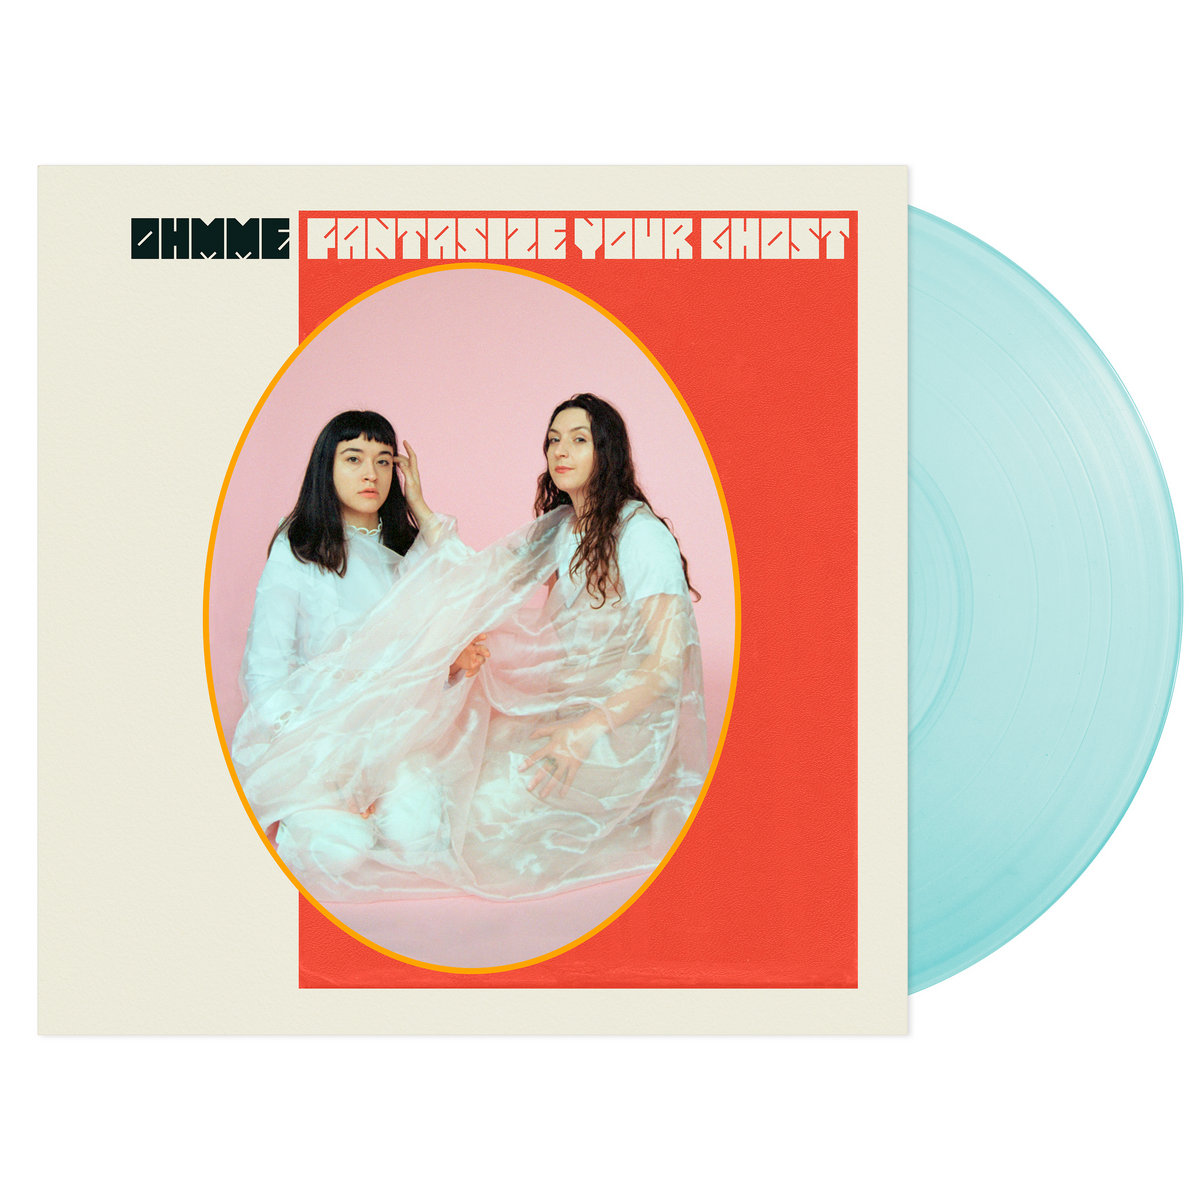 Ohmme "Fantasize Your Ghost" LP